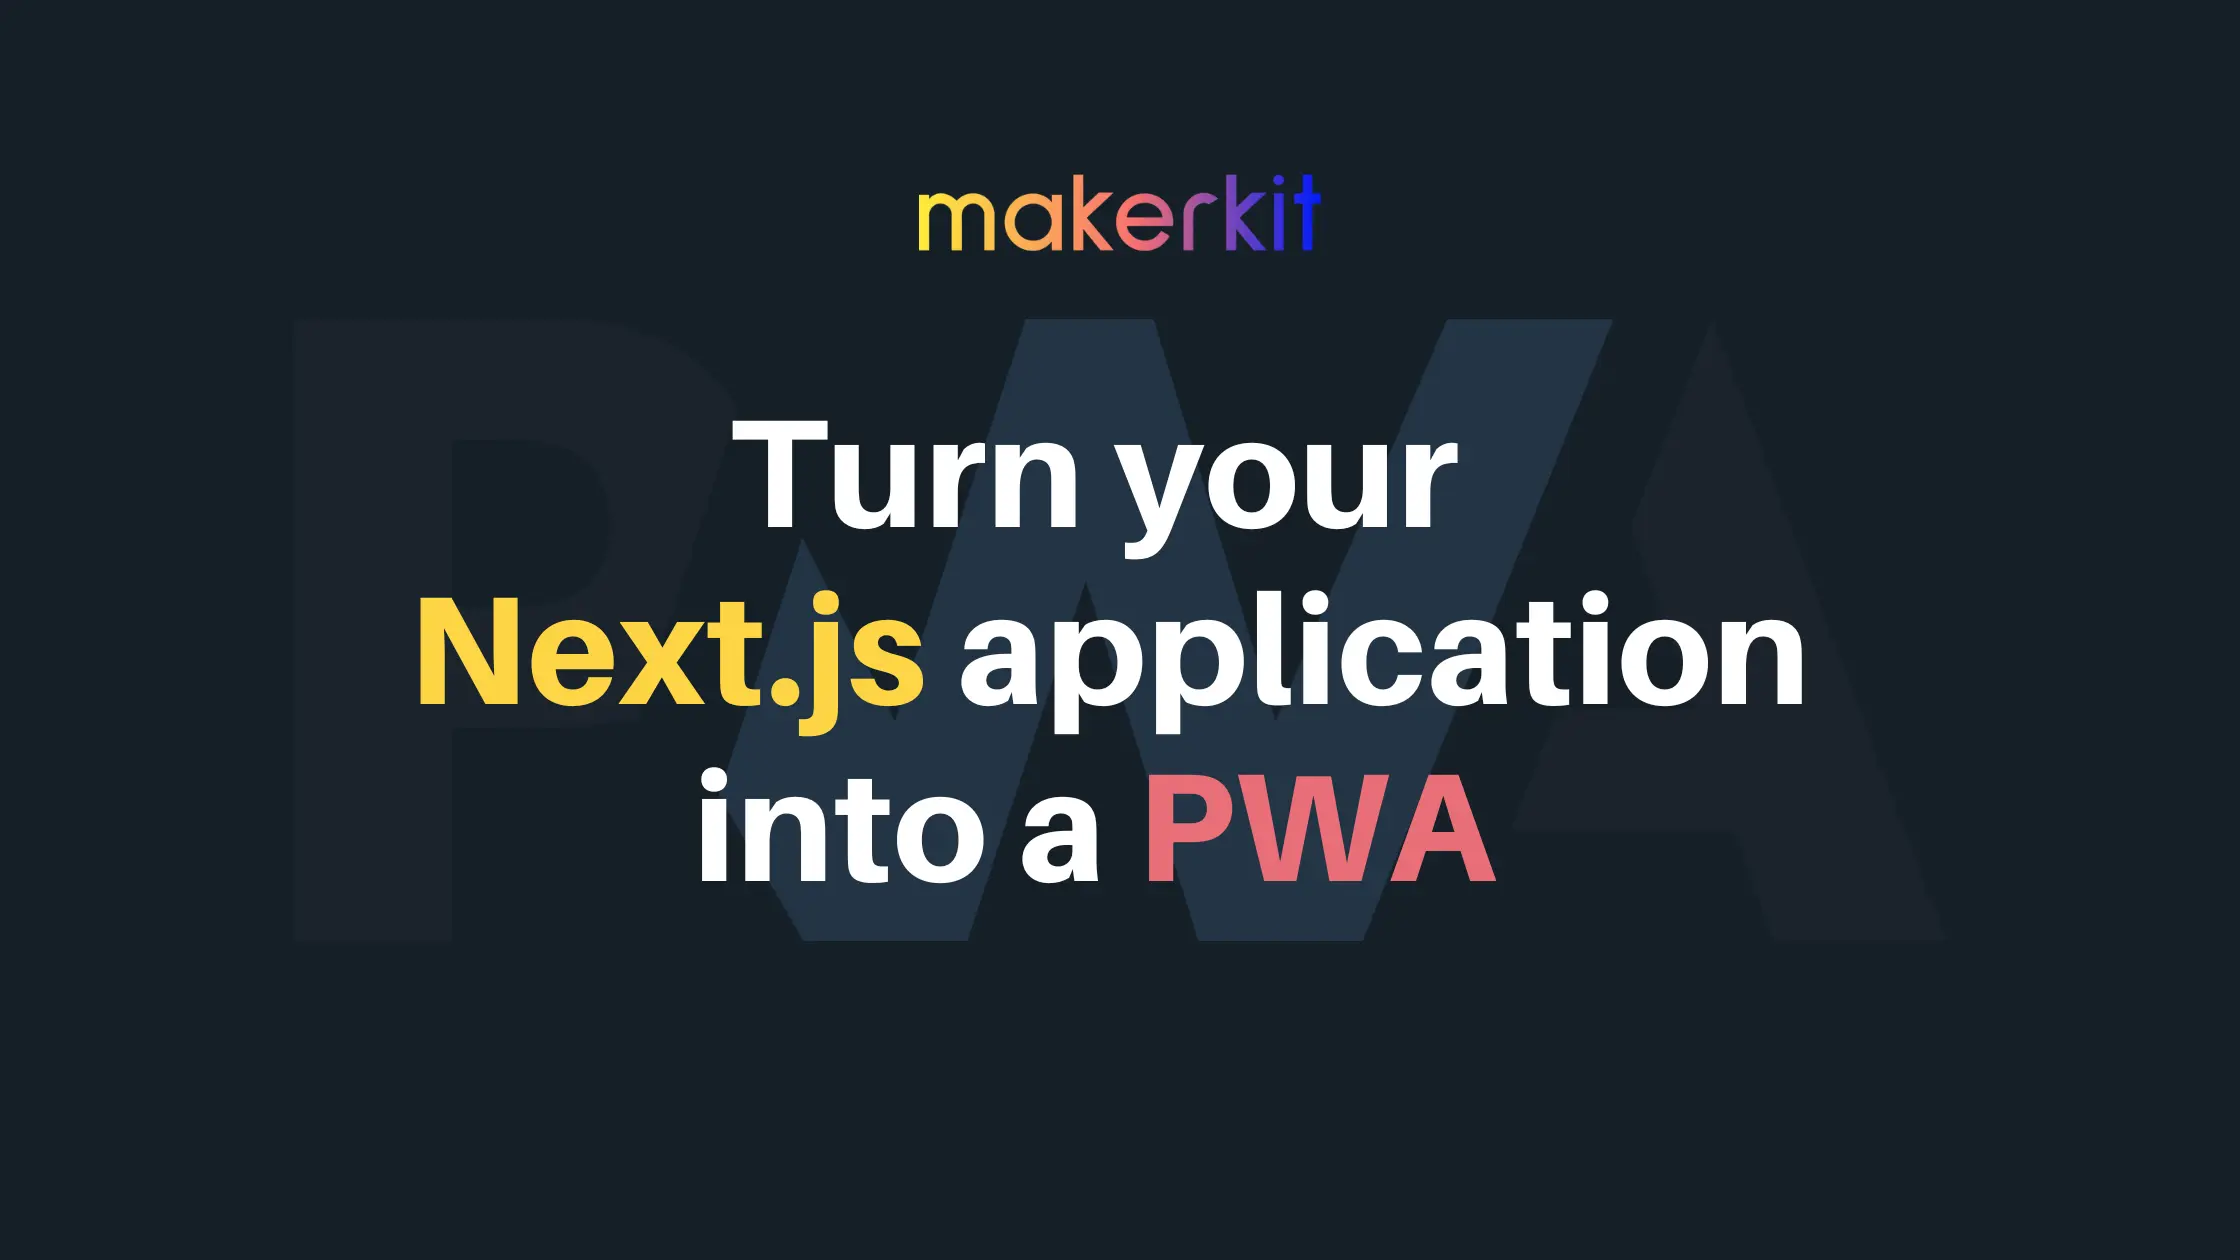 Cover Image for Turn your Next.js application into a PWA